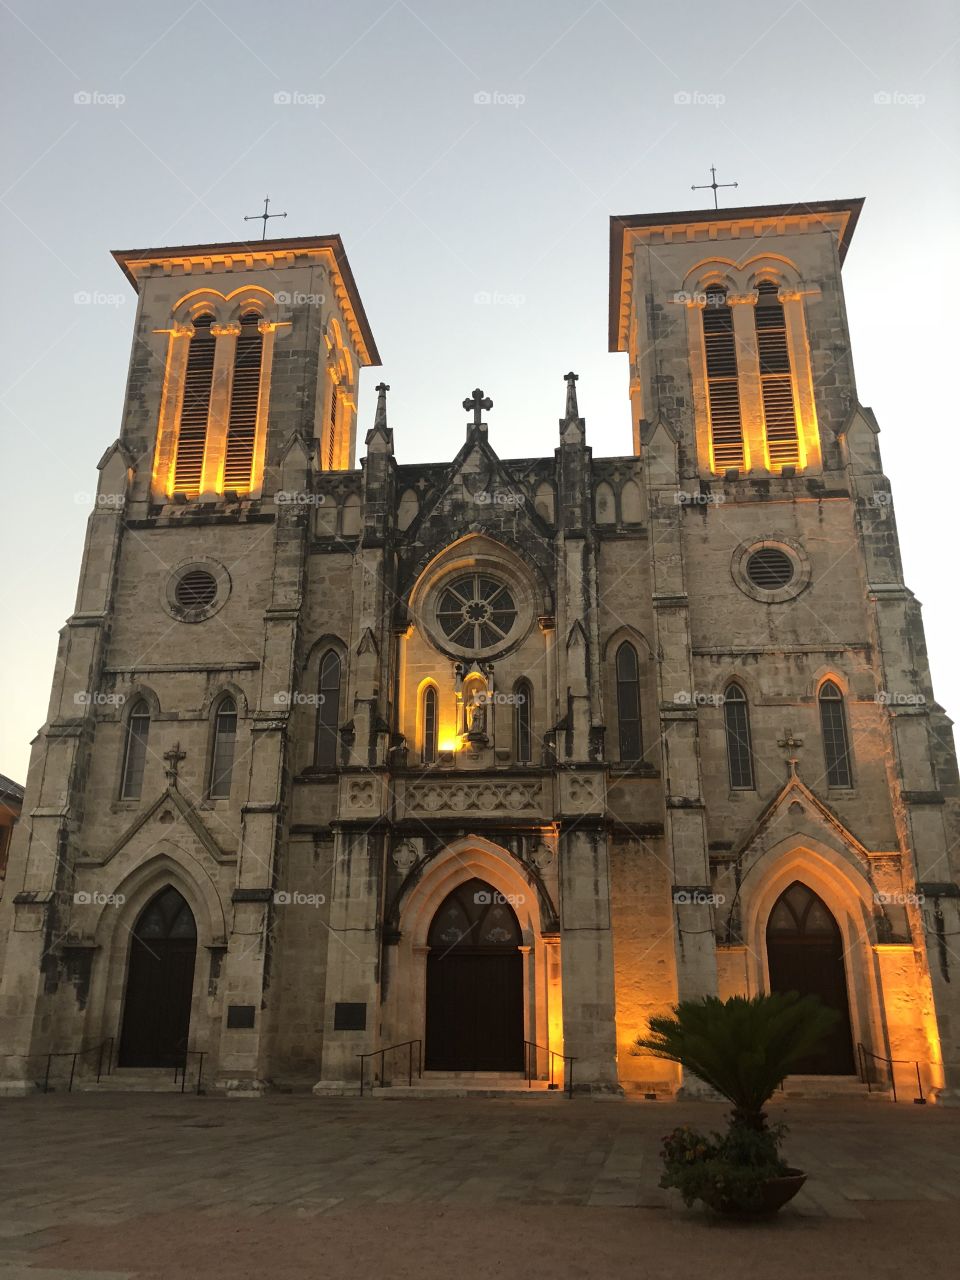 San Fernando Cathedral, San Antonio TX is breathtaking. I encourage you to go, both in its peak time to catch the light show and also early in the morning when no one else is around and become enveloped by its beauty. Meditate. Pray. Simply admire. 